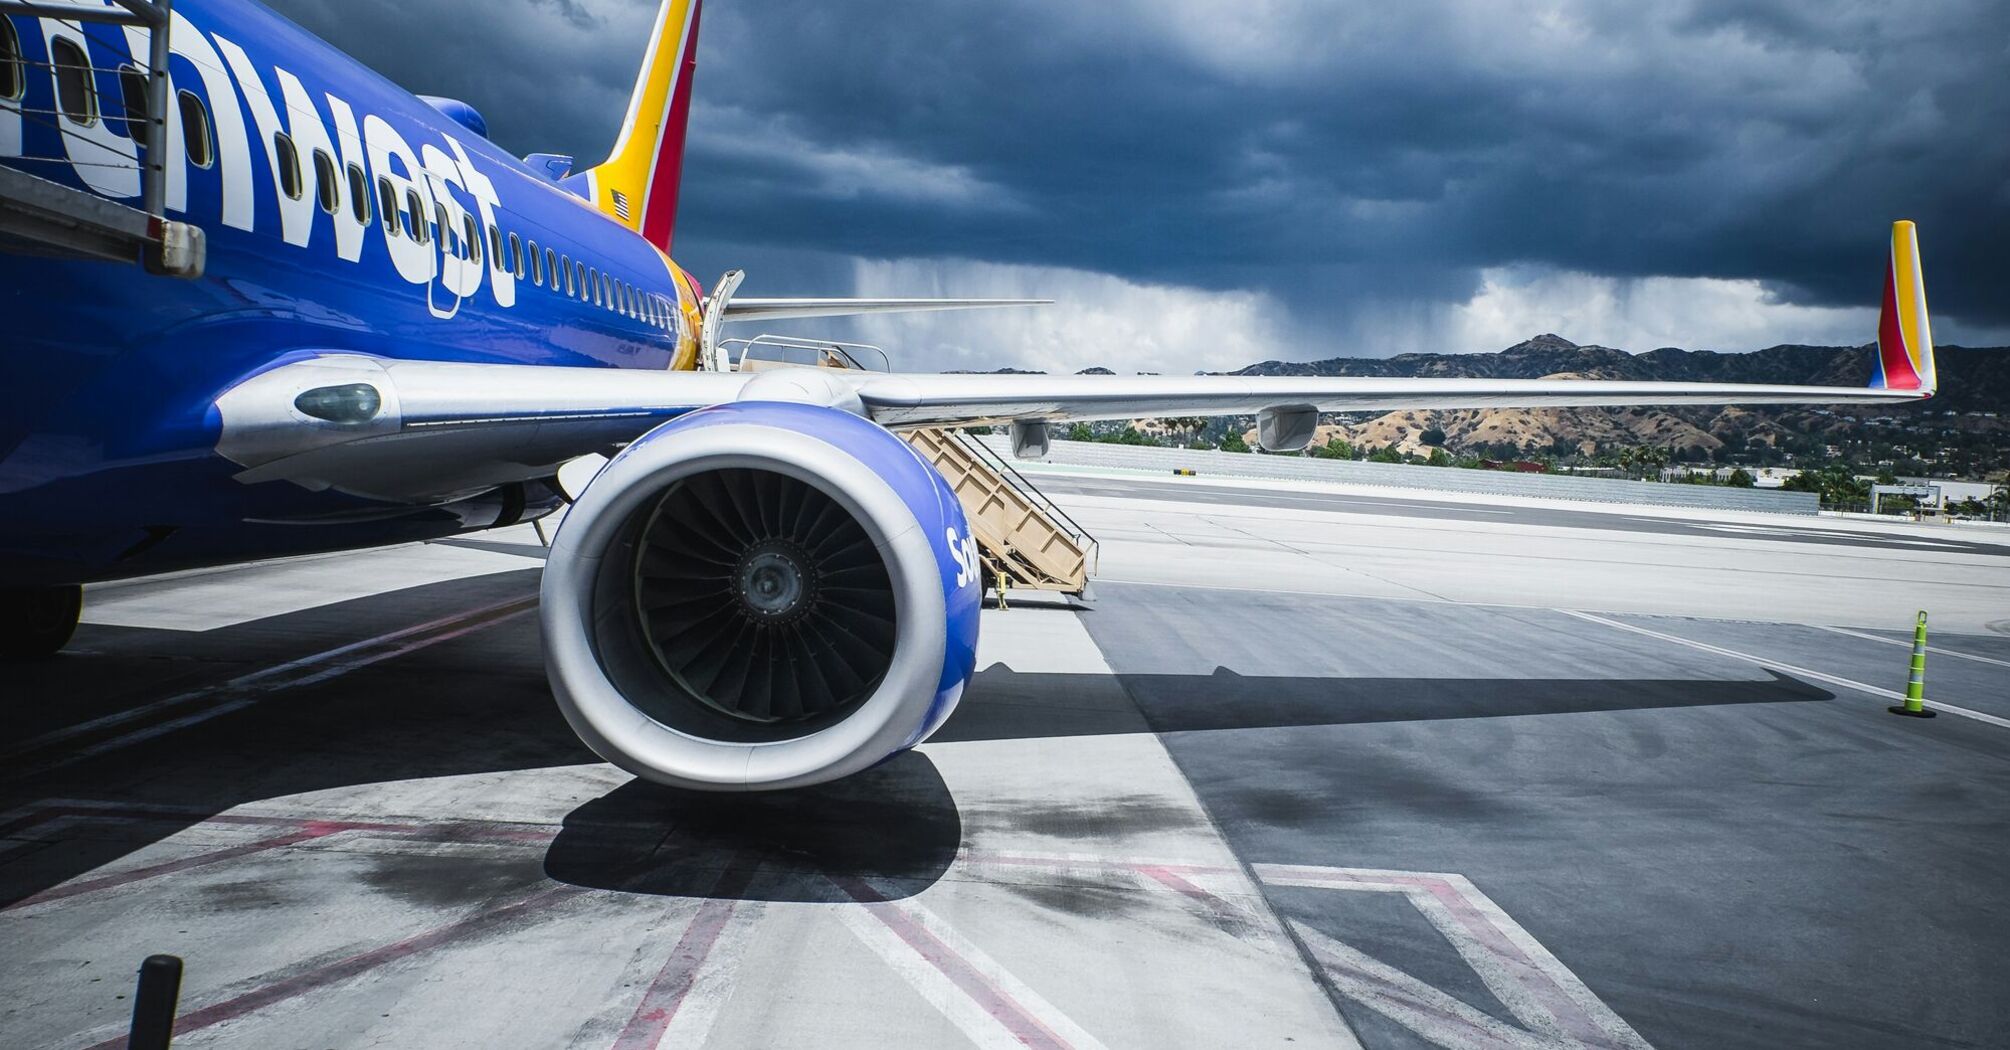 A Southwest Airlines plane on the ground, against a backdrop of stormy skies